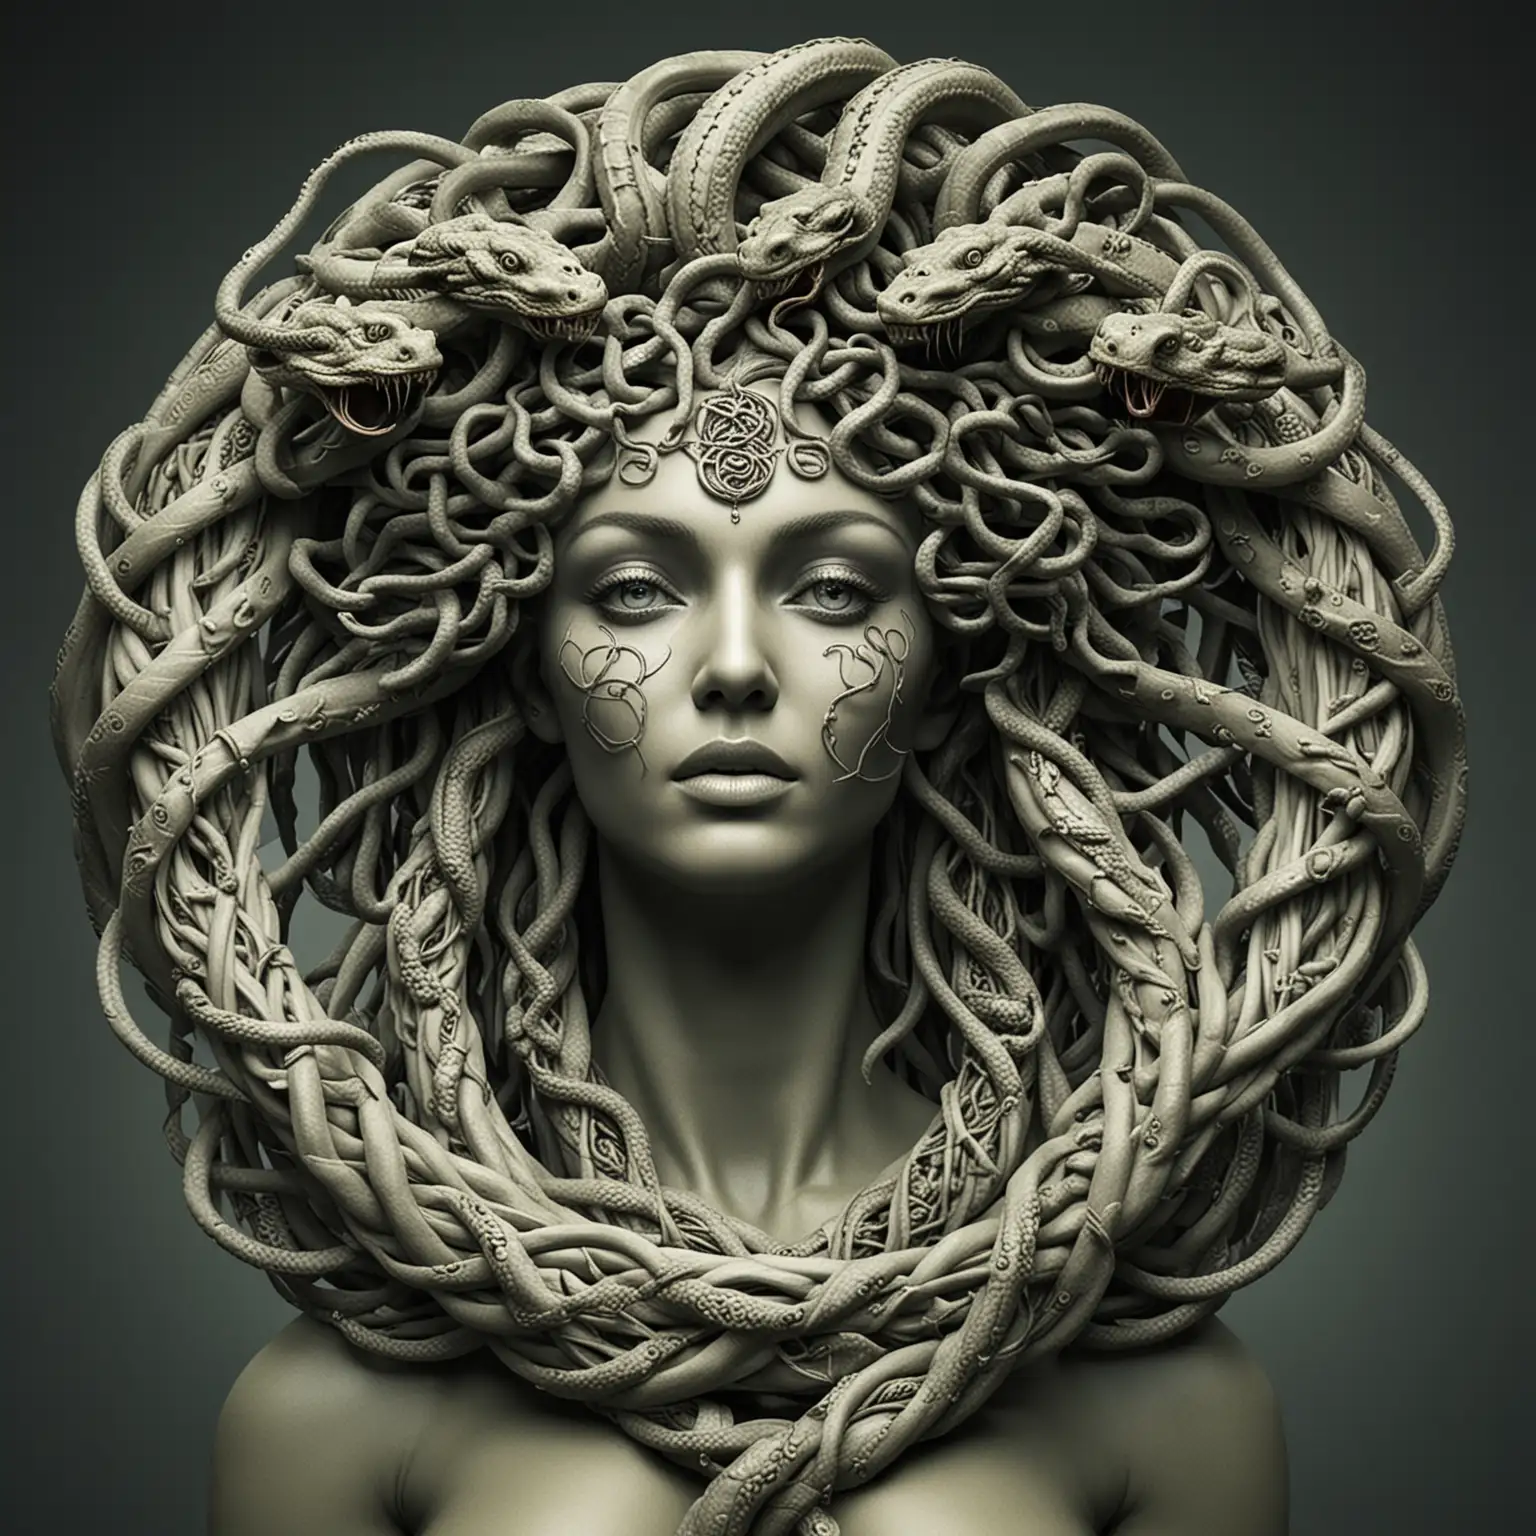 Medusa with Snakes Transforming into DNA Double Helix